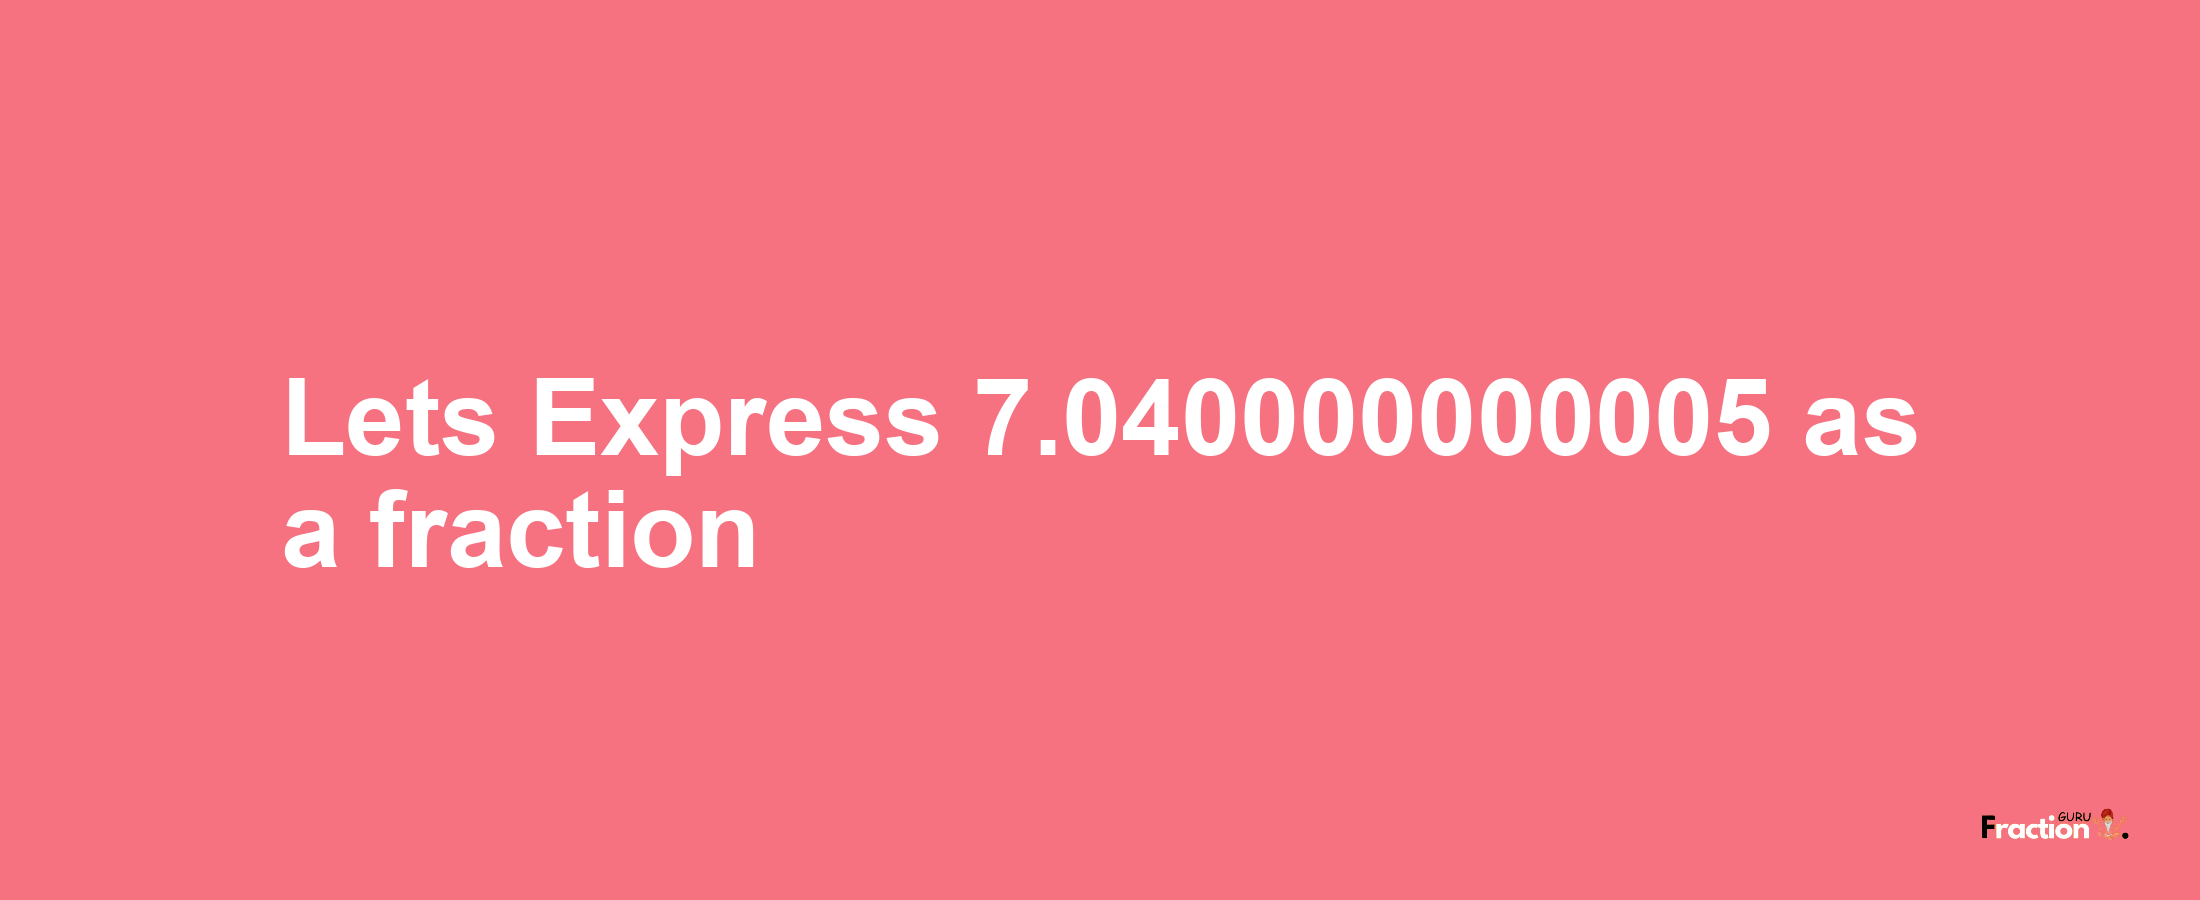 Lets Express 7.040000000005 as afraction